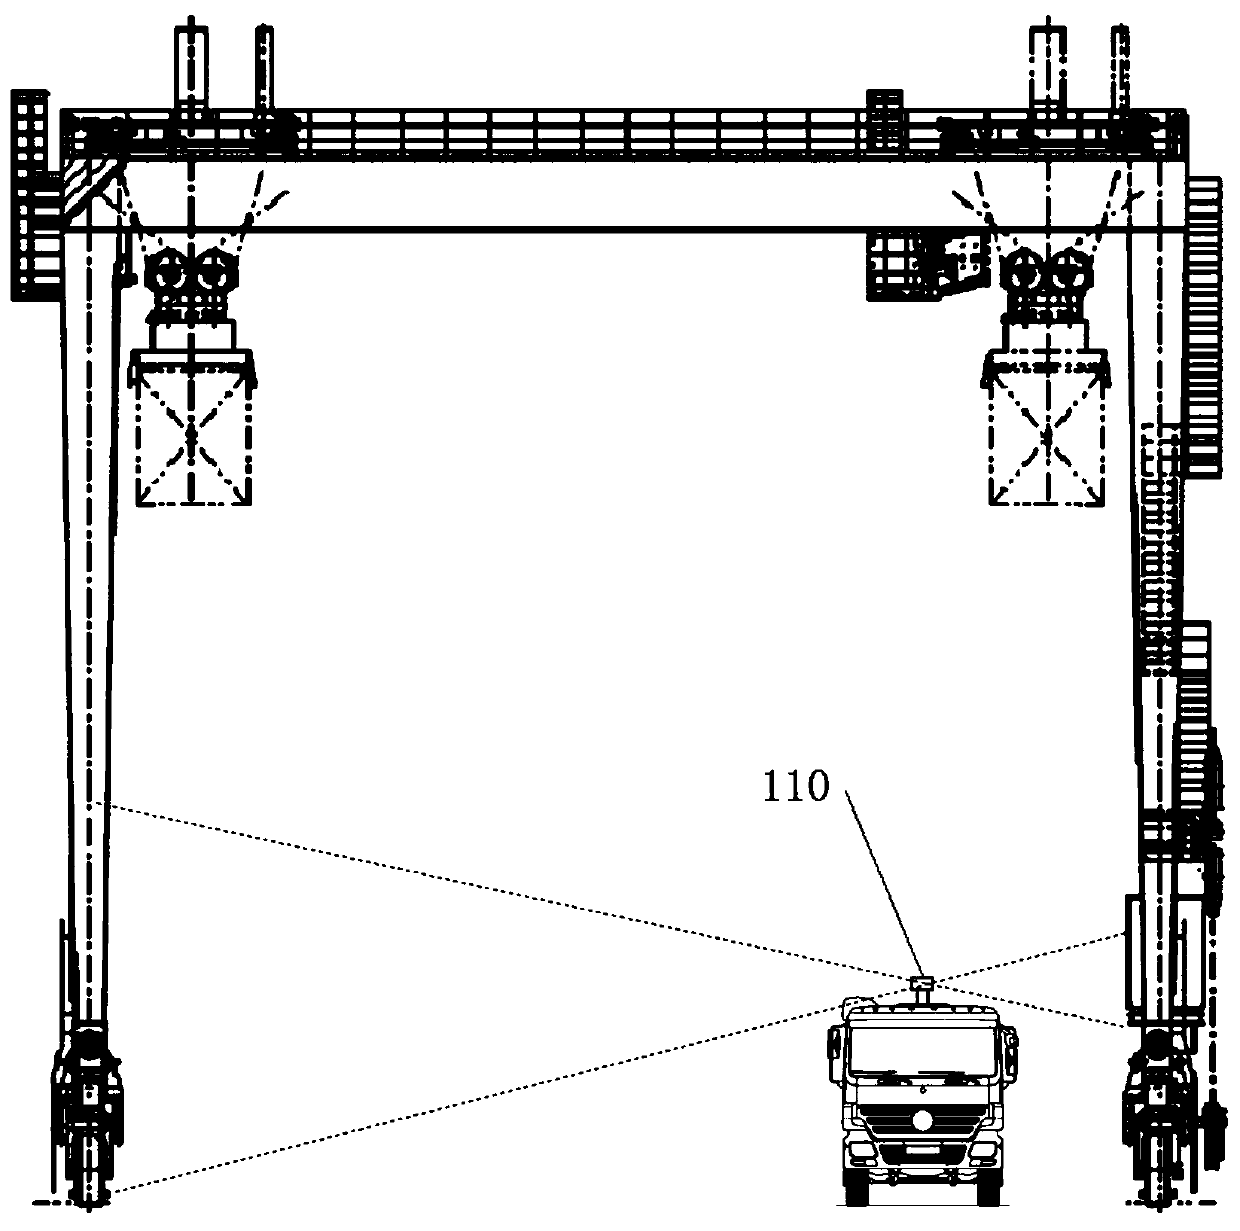 Template matching-based accurate positioning system and method for port unmanned container truck and crane